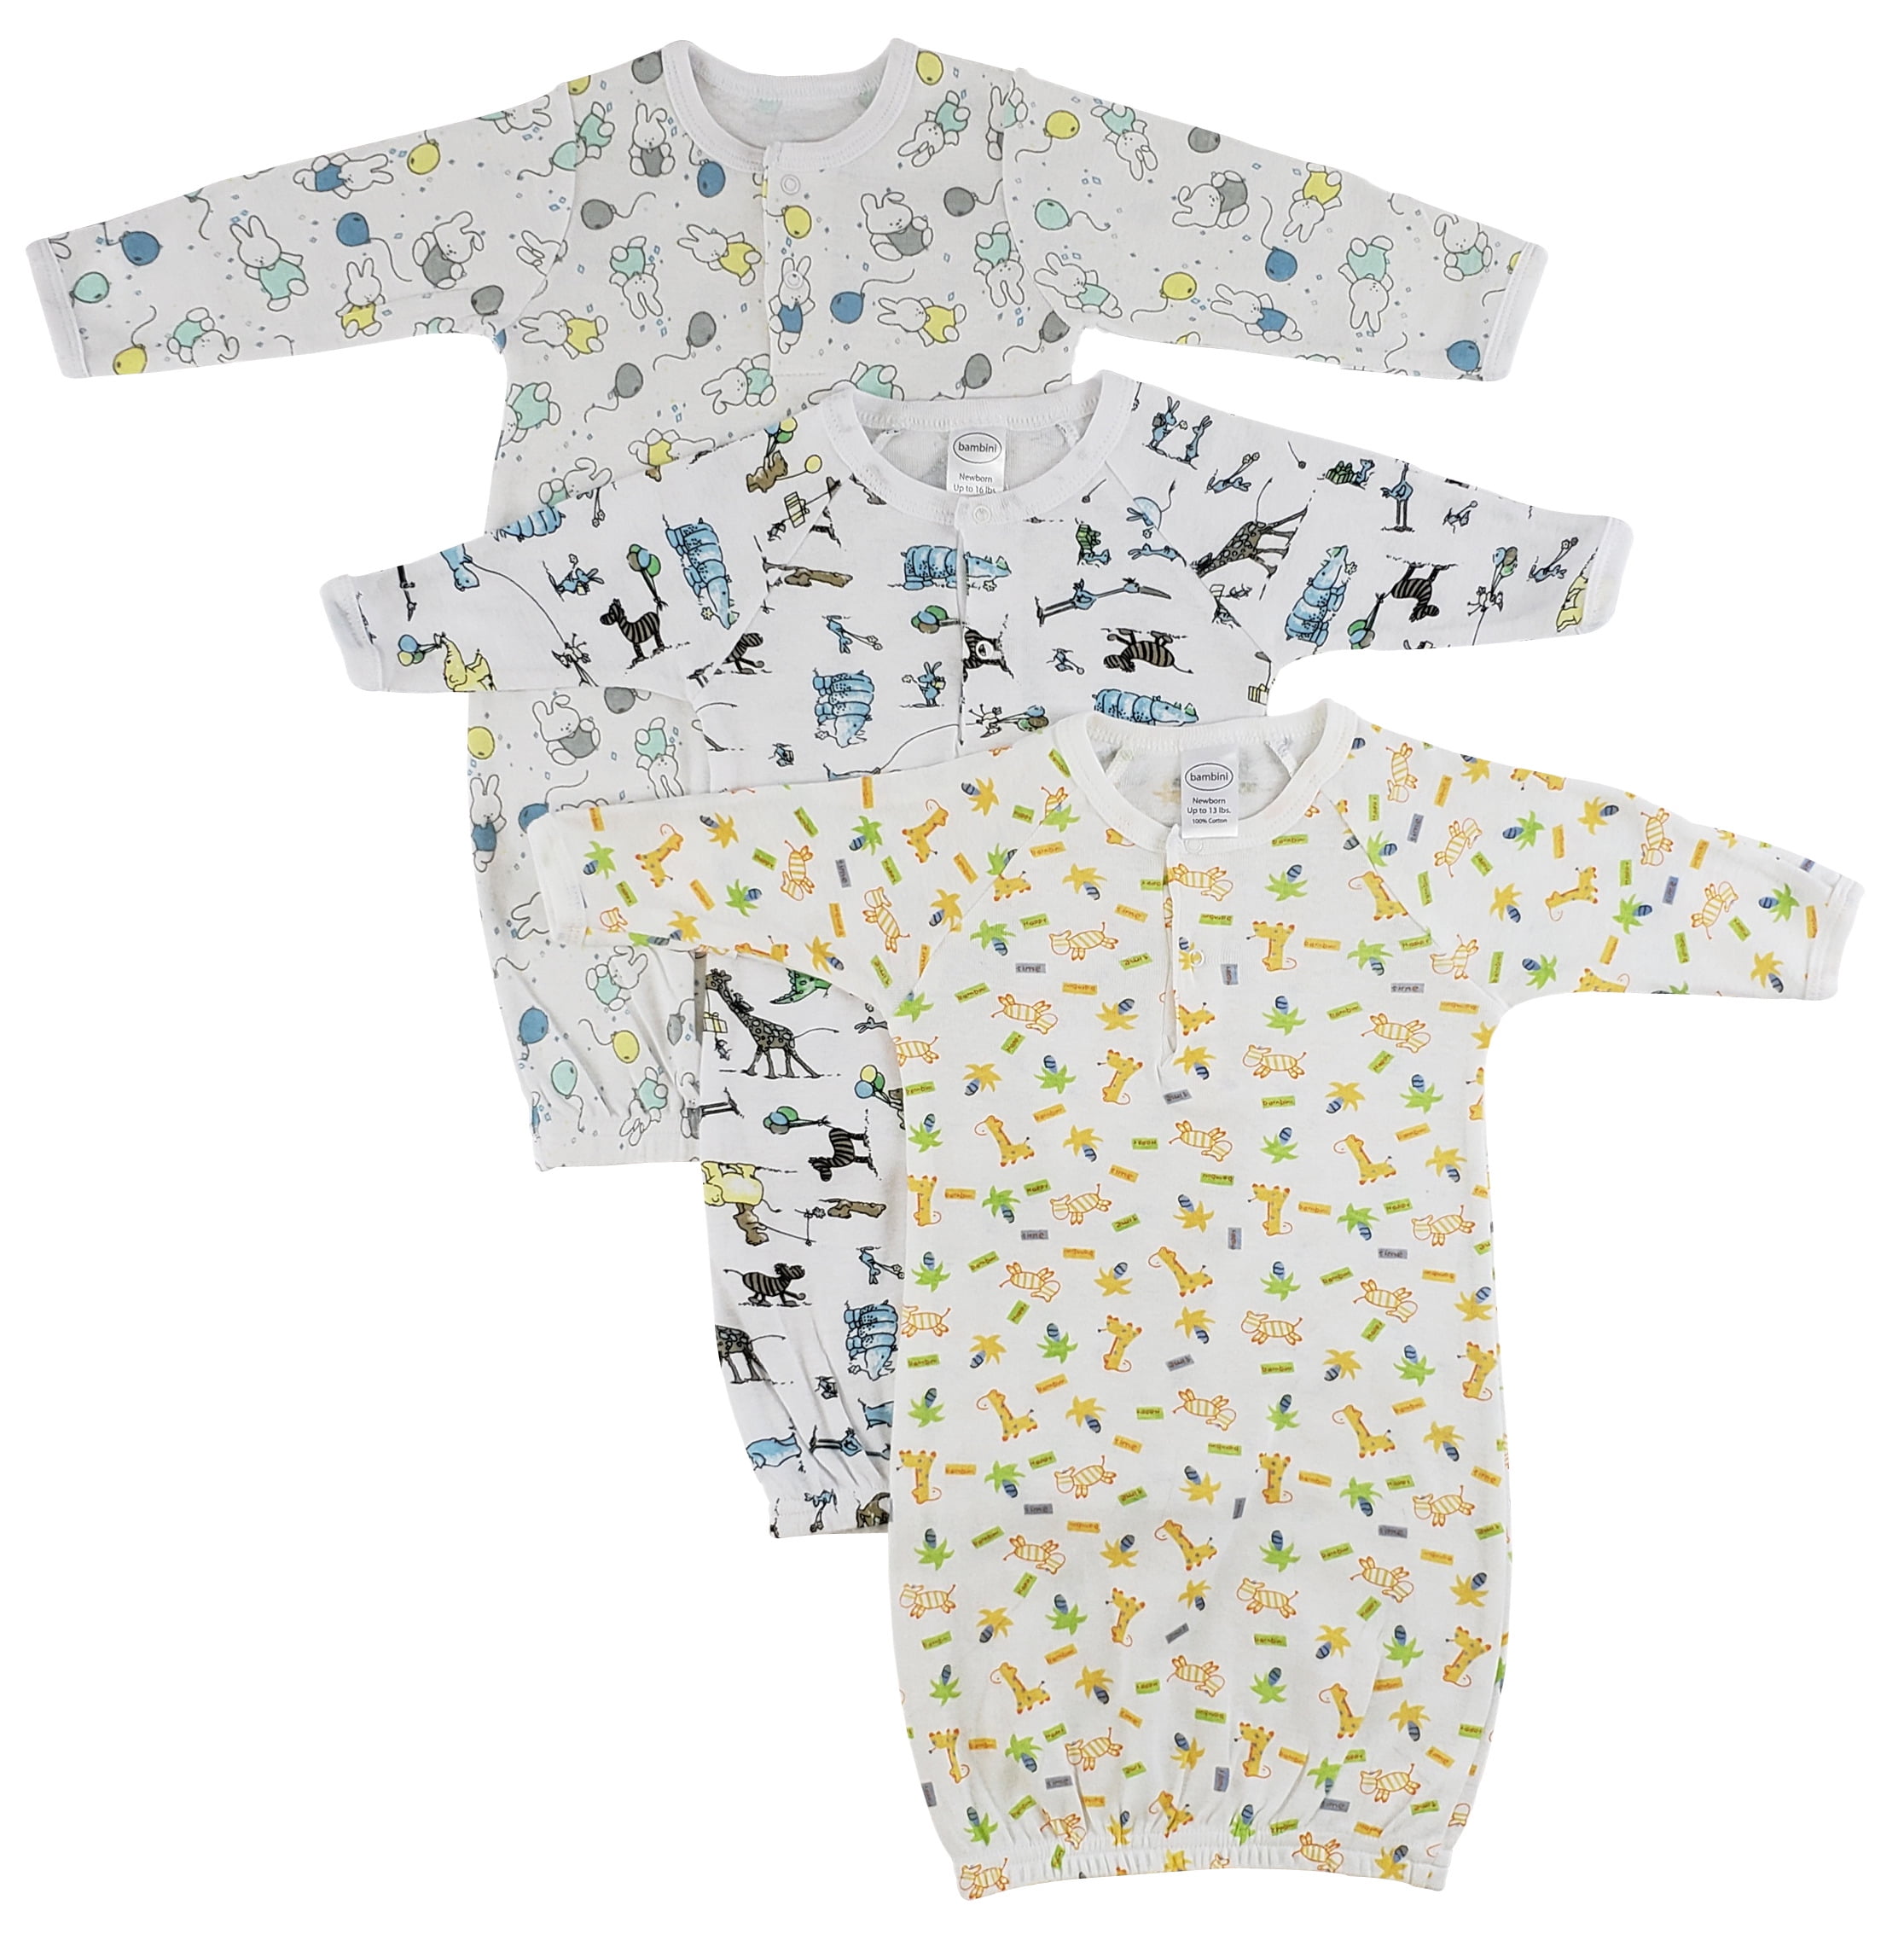 Bambini Infant Gowns - 3 Pack - Walmart.com